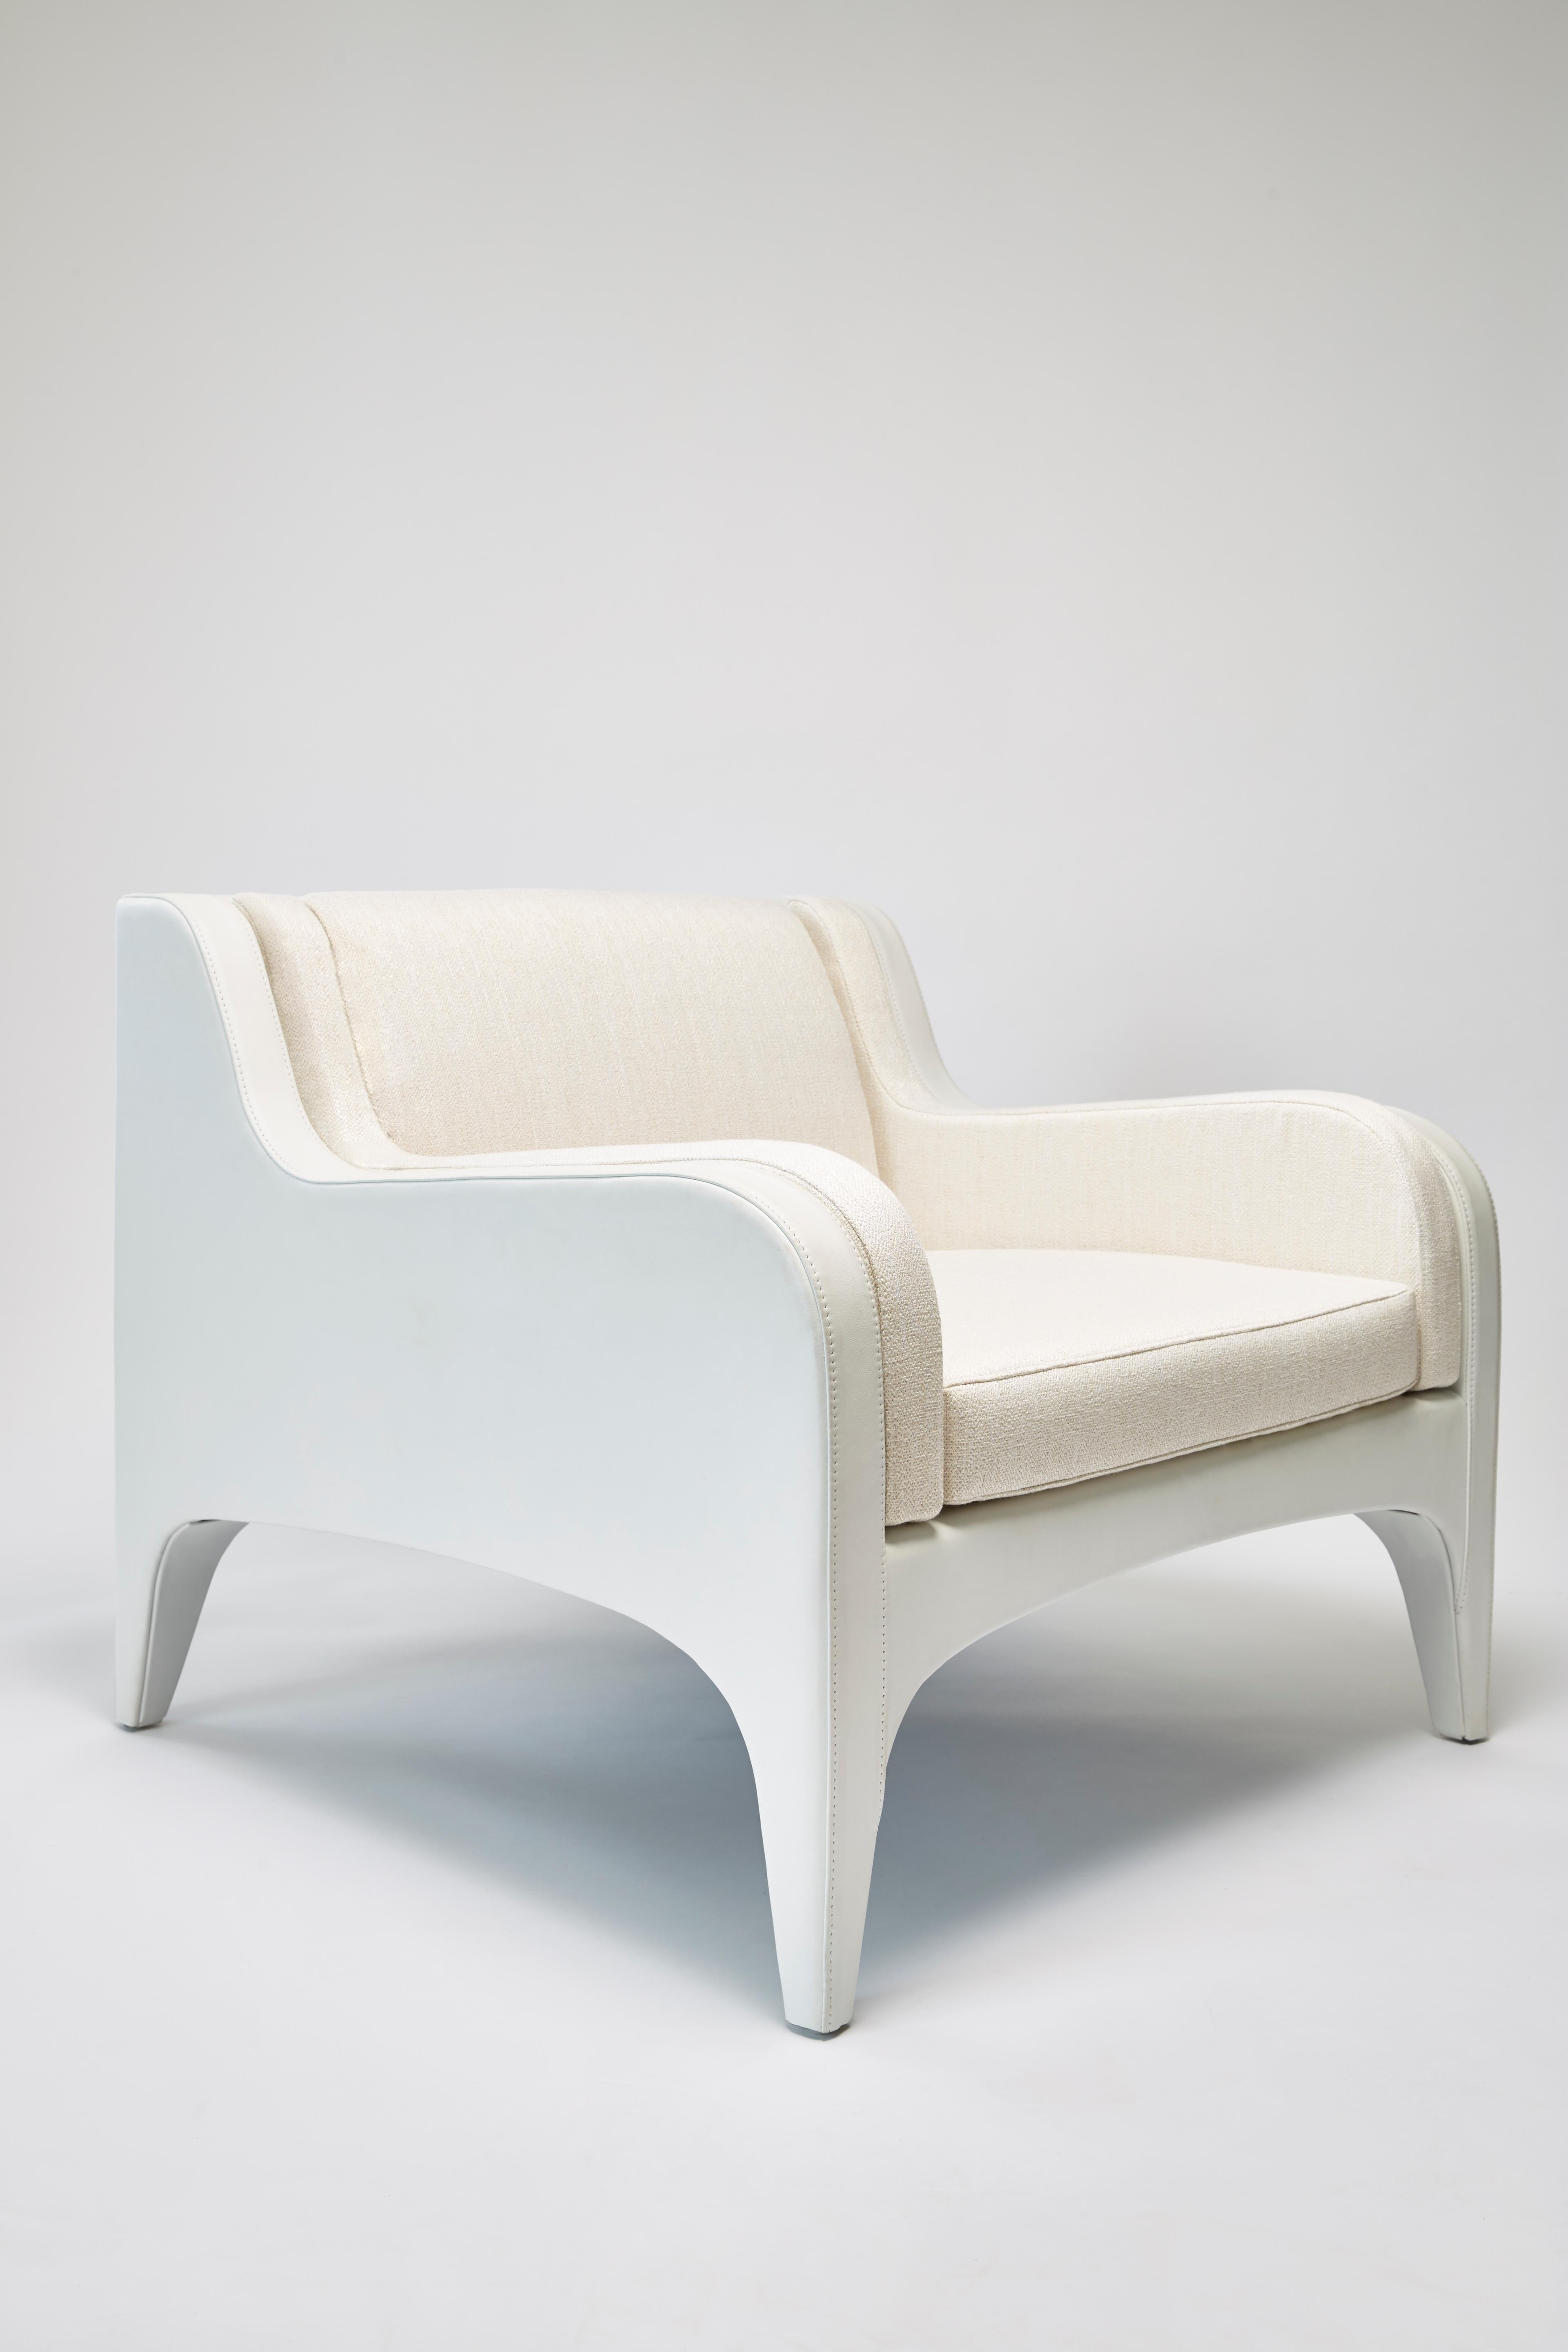 Contemporary Armchair SEASON by Reda Amalou Design - White Leather For Sale